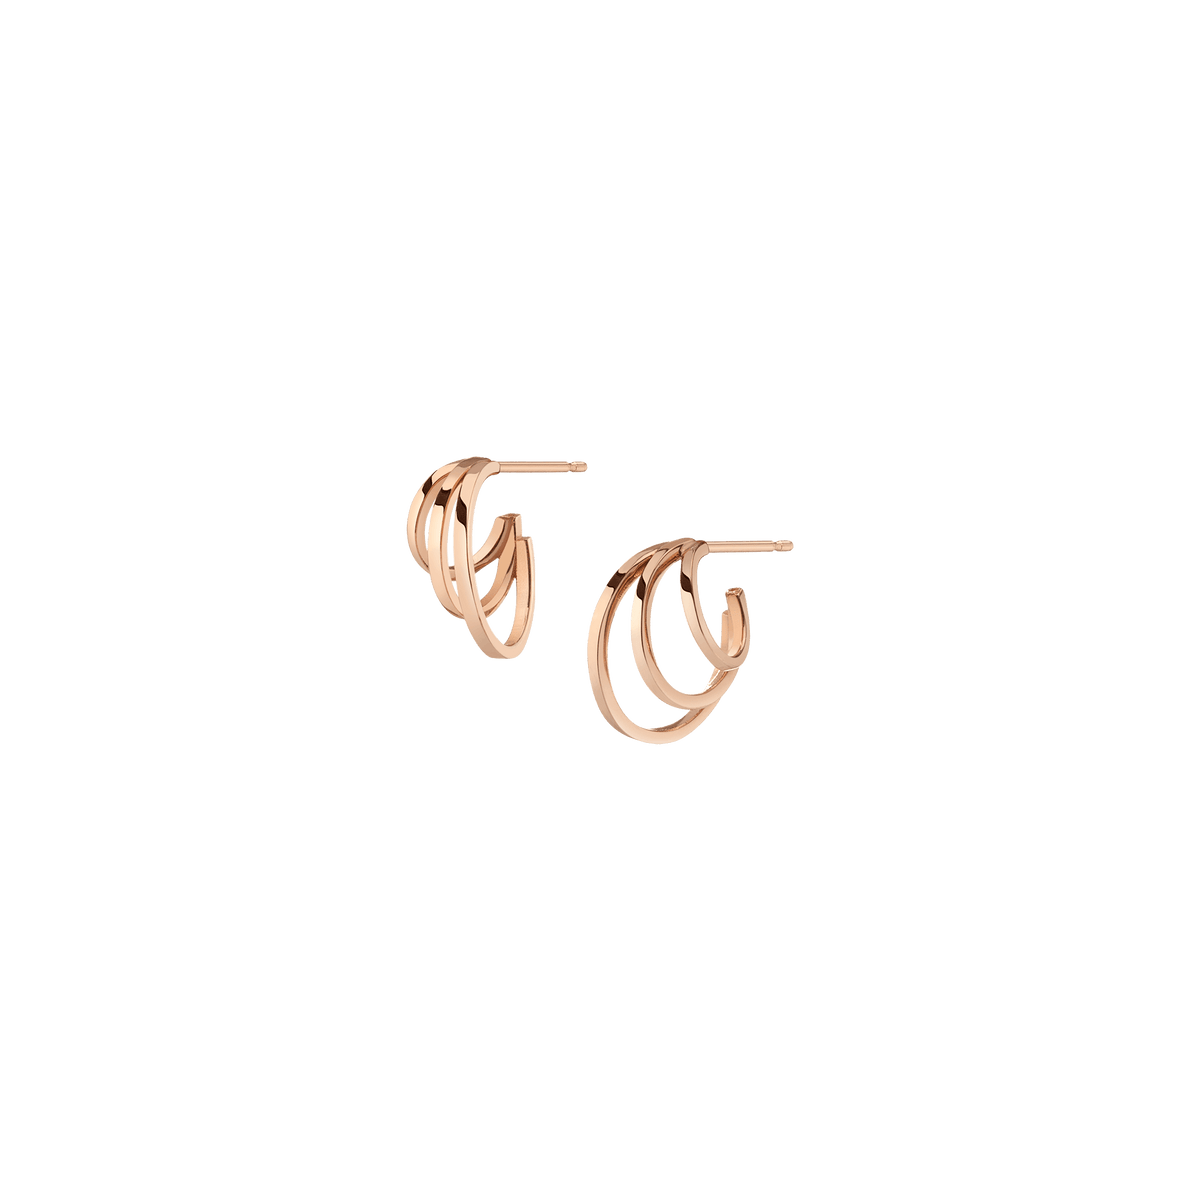 14K Gold Love Letter Font Hoop Earrings 'You Are Pure Love